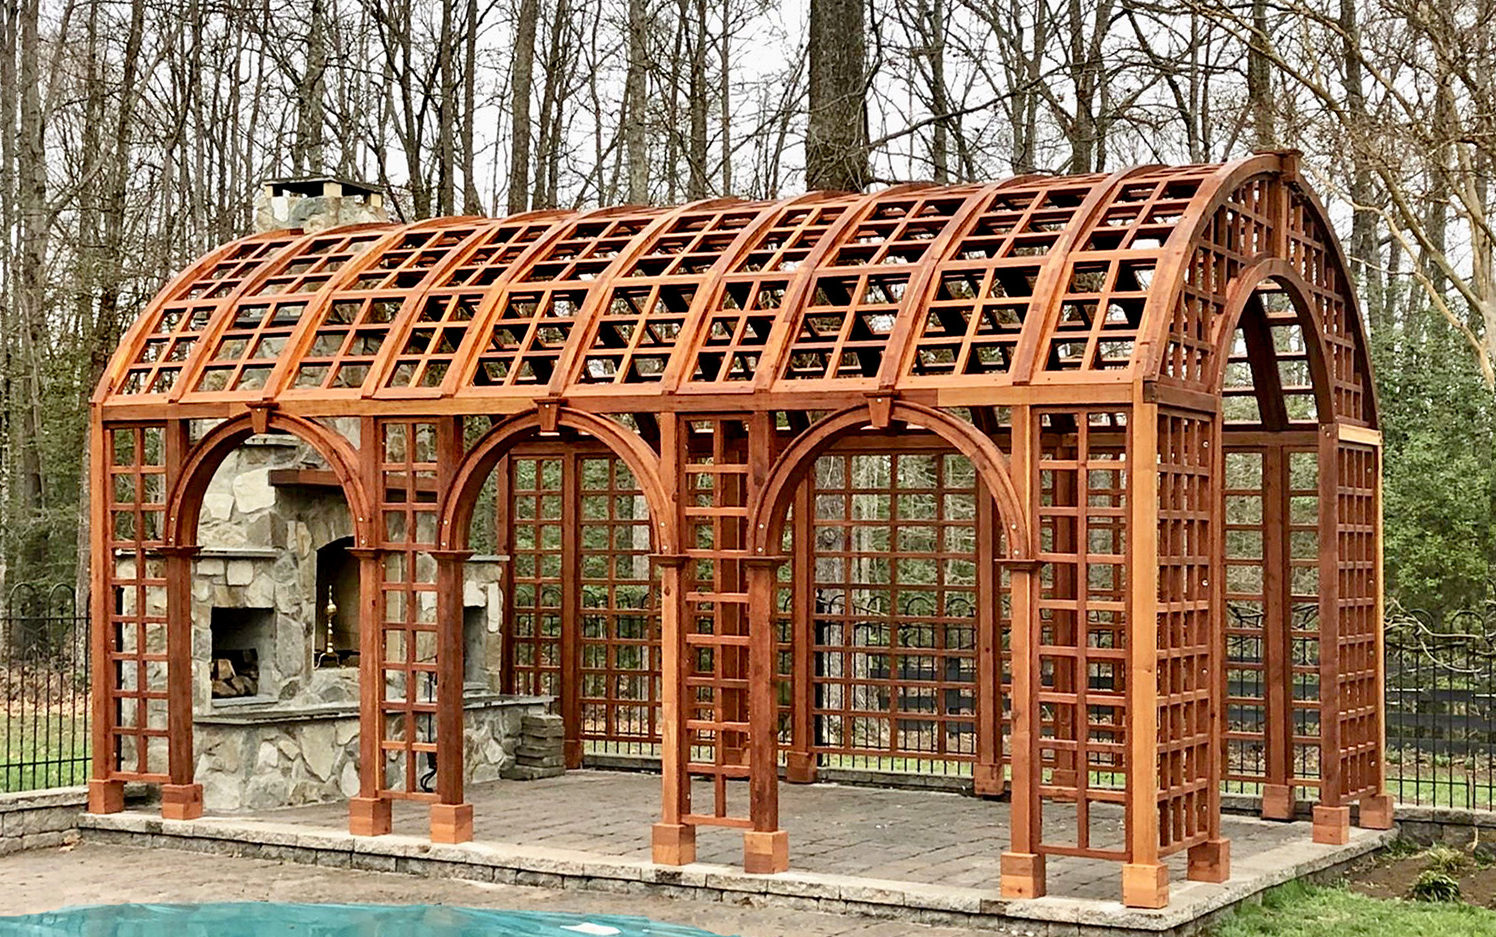 The Victorian Trellis: a custom project for Trish and JR West